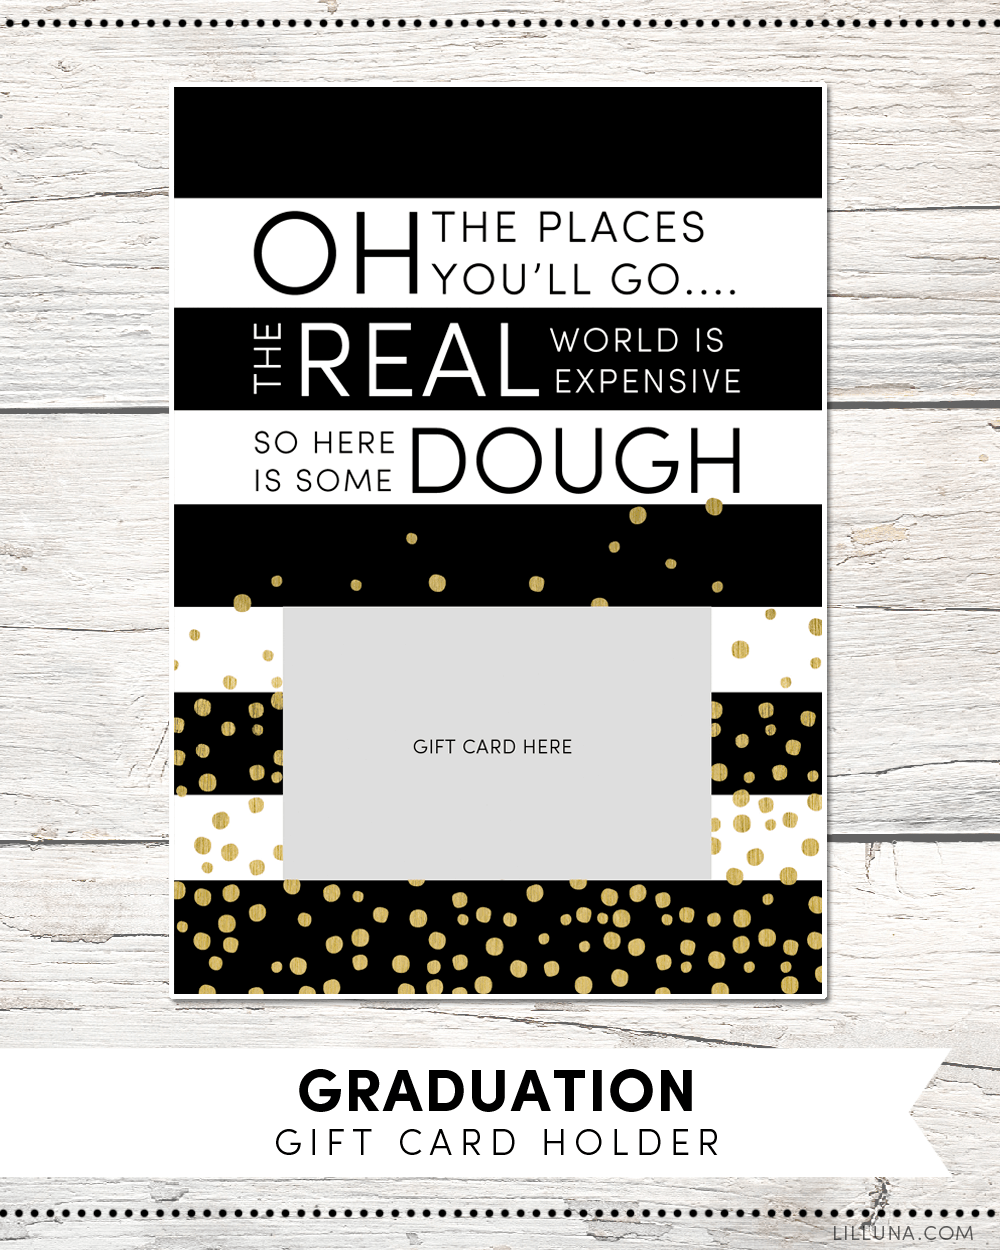 FREE Graduation Gift Card Holder Print - just attach a gift card and give to your favorite graduate for a simple and cute gift idea!